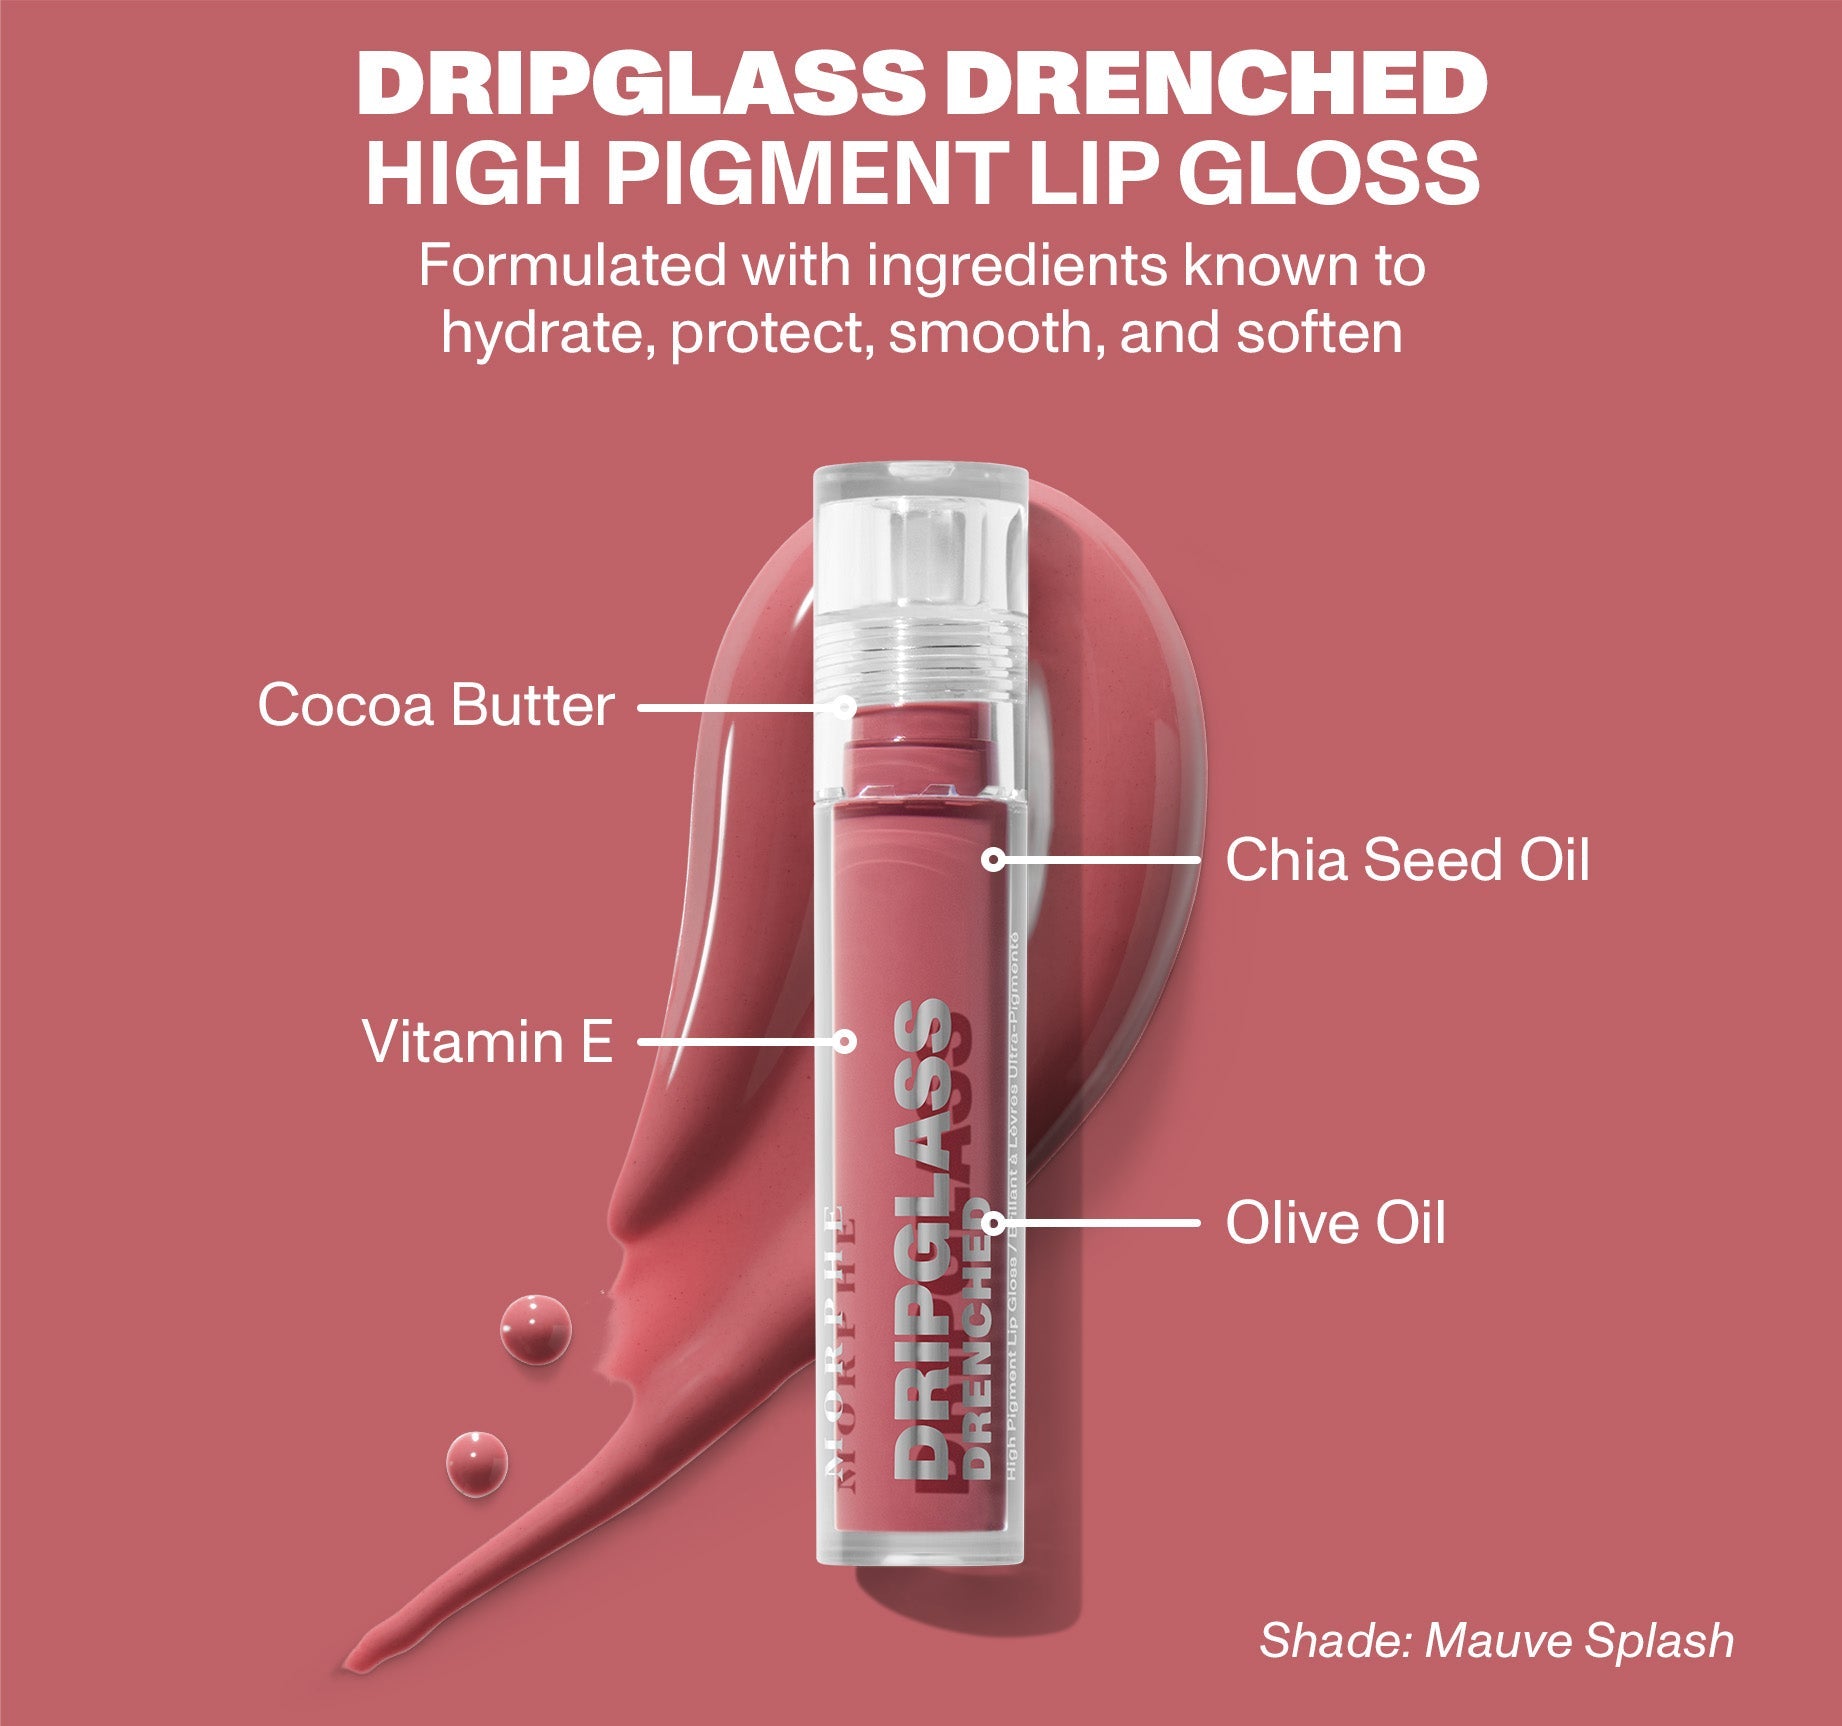 Dripglass Drenched High Pigment Lip Gloss - Cocoa Melt - Image 9